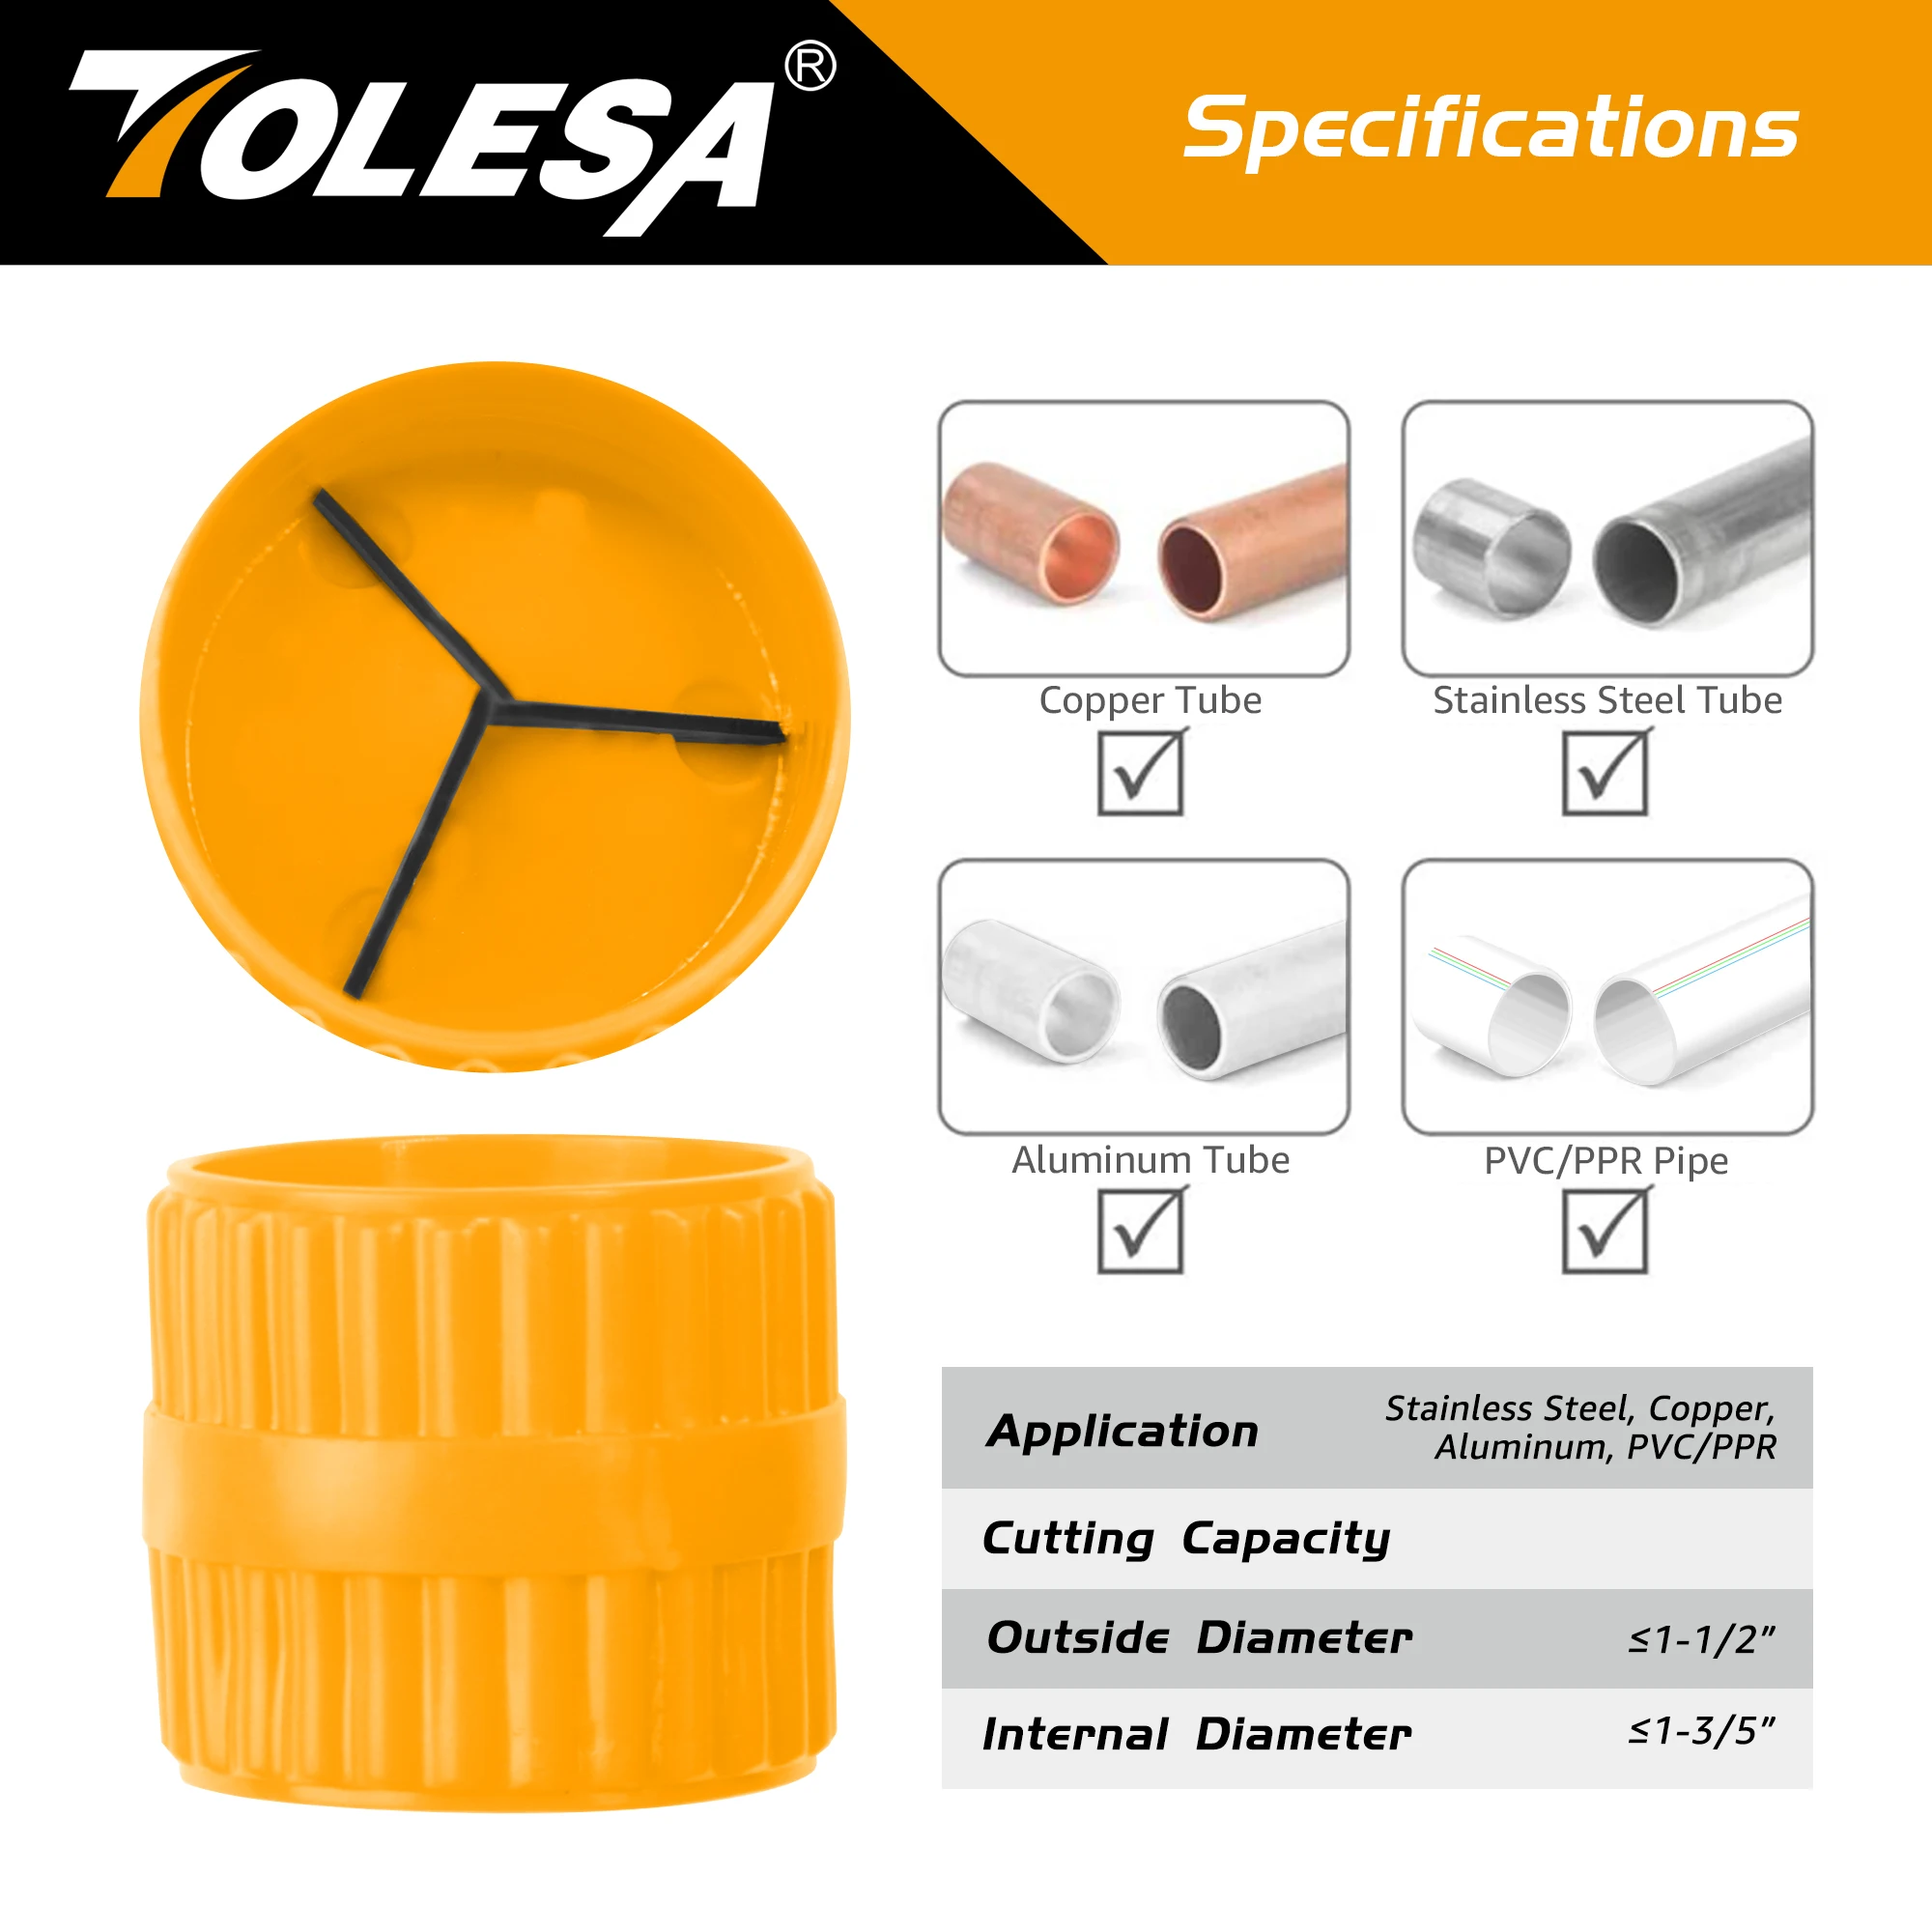 TOLESA 5-50mm Pipe Cutter Tools Heavy Duty Tube Cutter for Cutting Plastic Pipe Copper Brass Aluminum Thin Stainless Steel Pipe enlarge